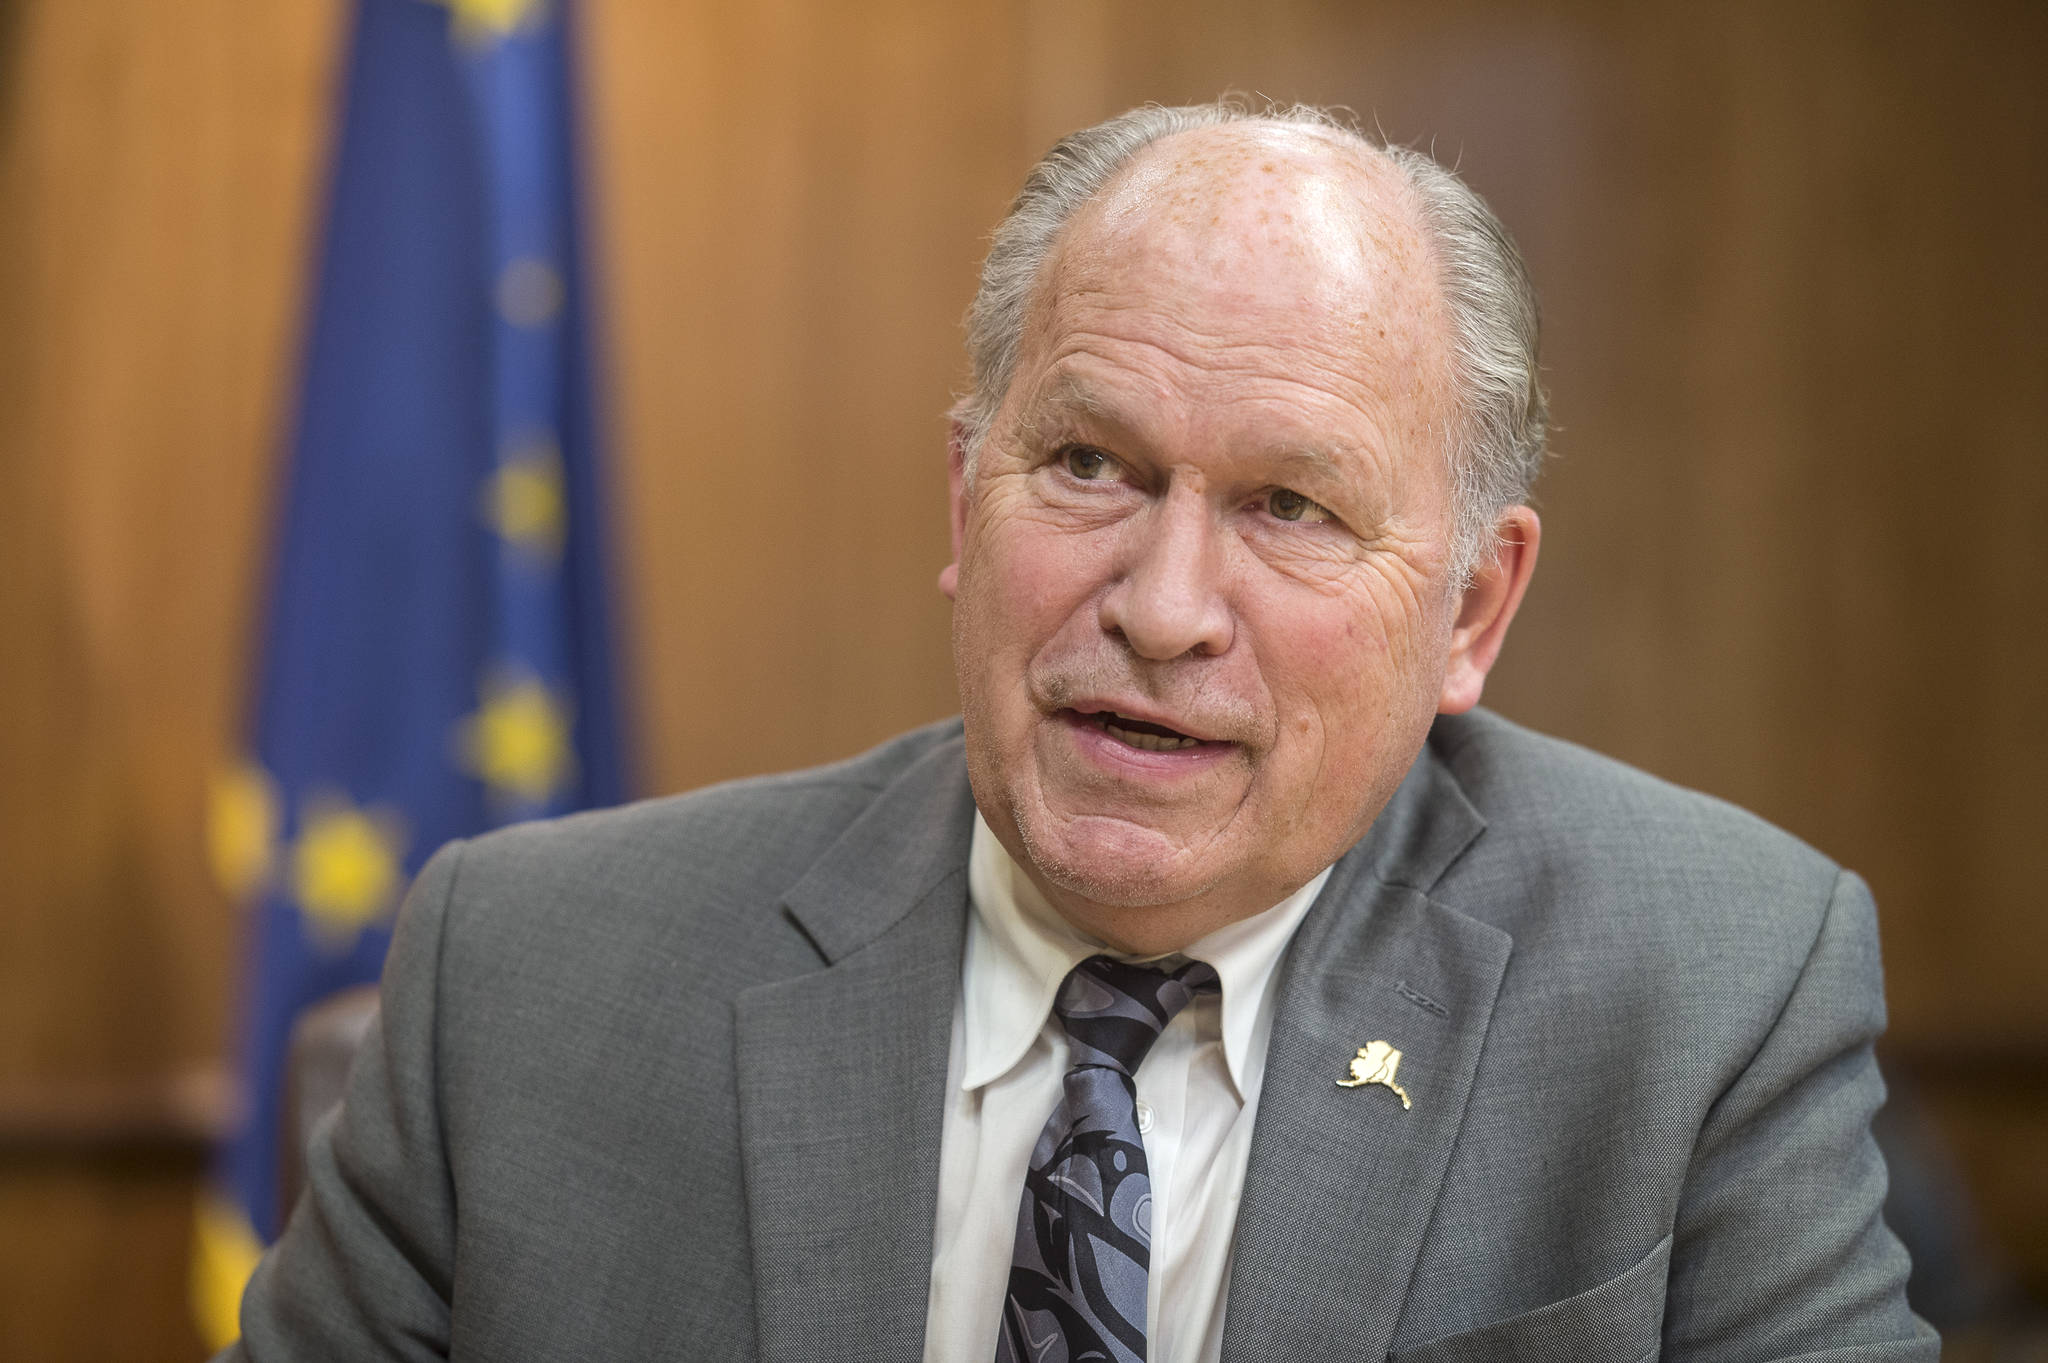 Gov. Bill Walker talks about his four years as governor during an interview on Wednesday, Nov. 28, 2018. (Michael Penn | Juneau Empire)                                 Gov. Bill Walker talks about his four years as governor during an interview on Wednesday, Nov. 28, 2018. (Michael Penn | Juneau Empire)